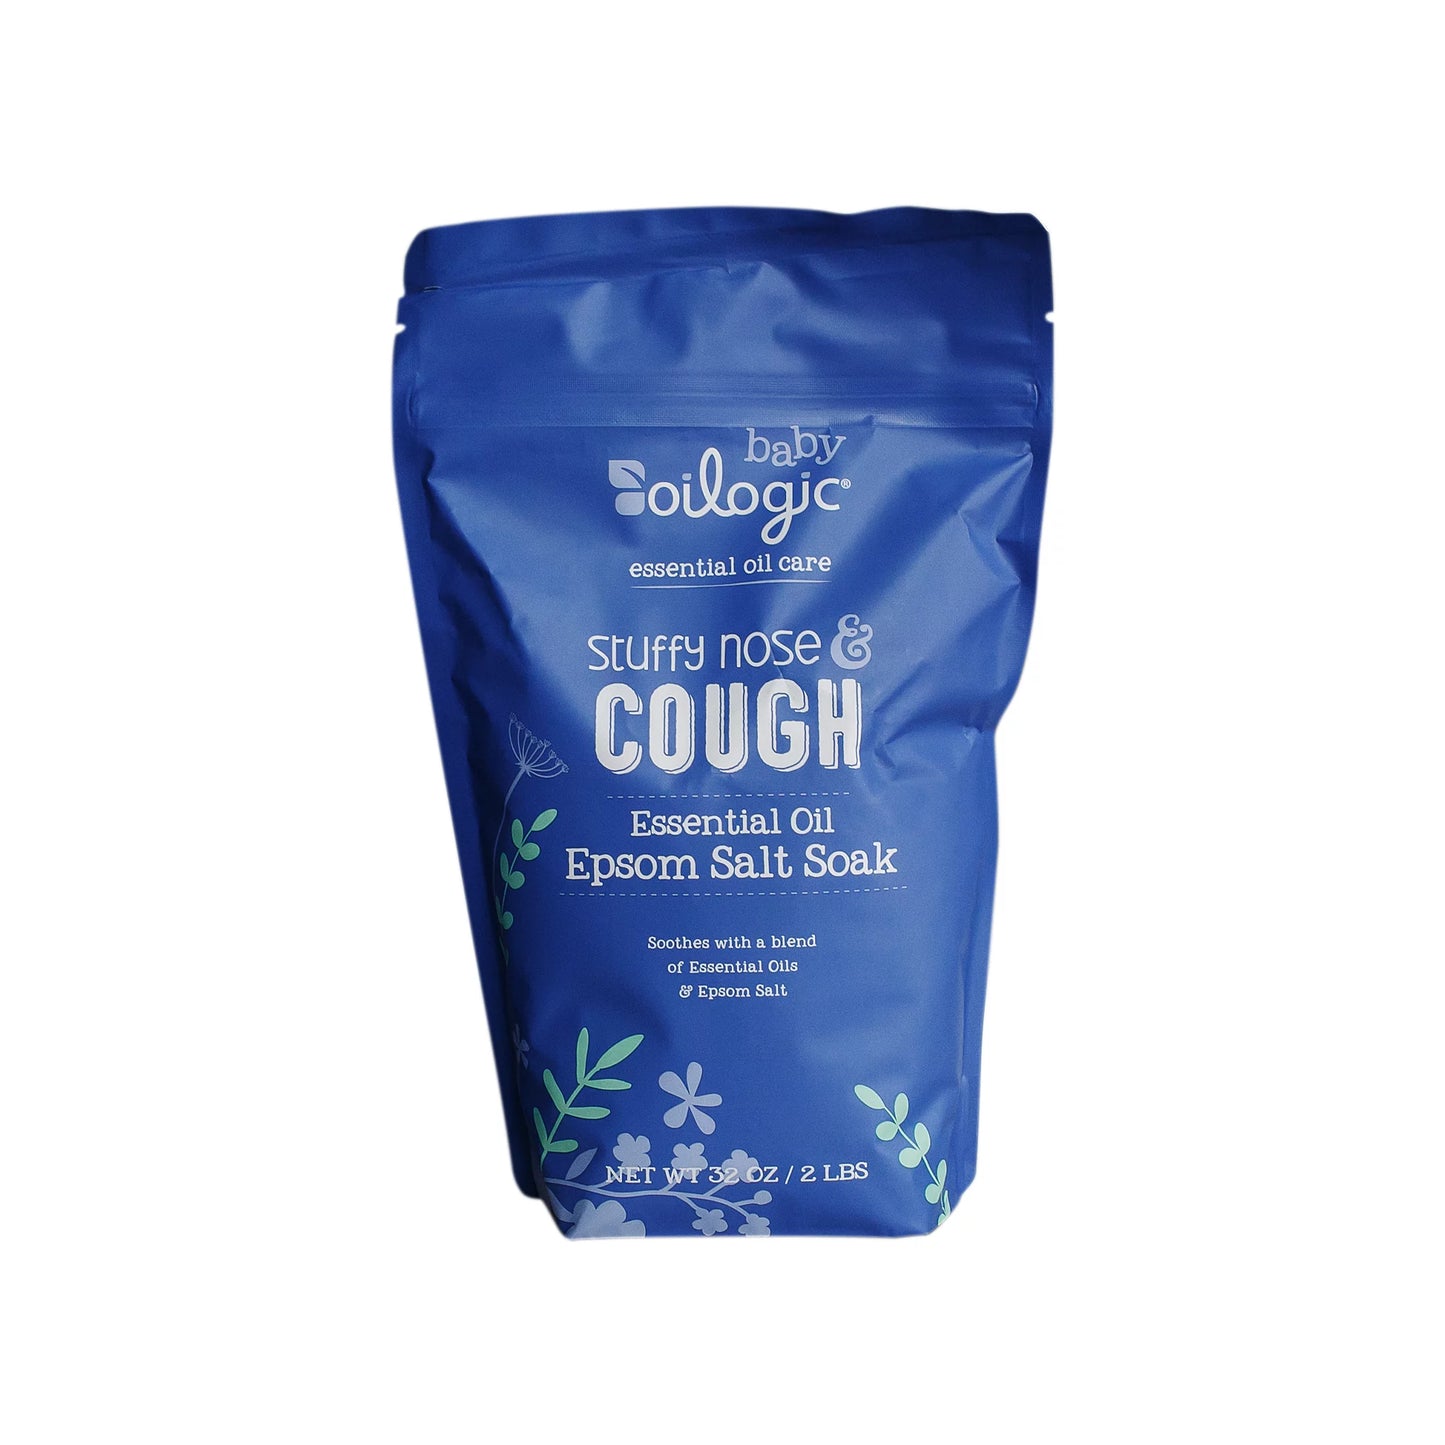 Oilogic Stuffy Nose & Cough Baby Essential Oil Epsom Soak, 2lbs